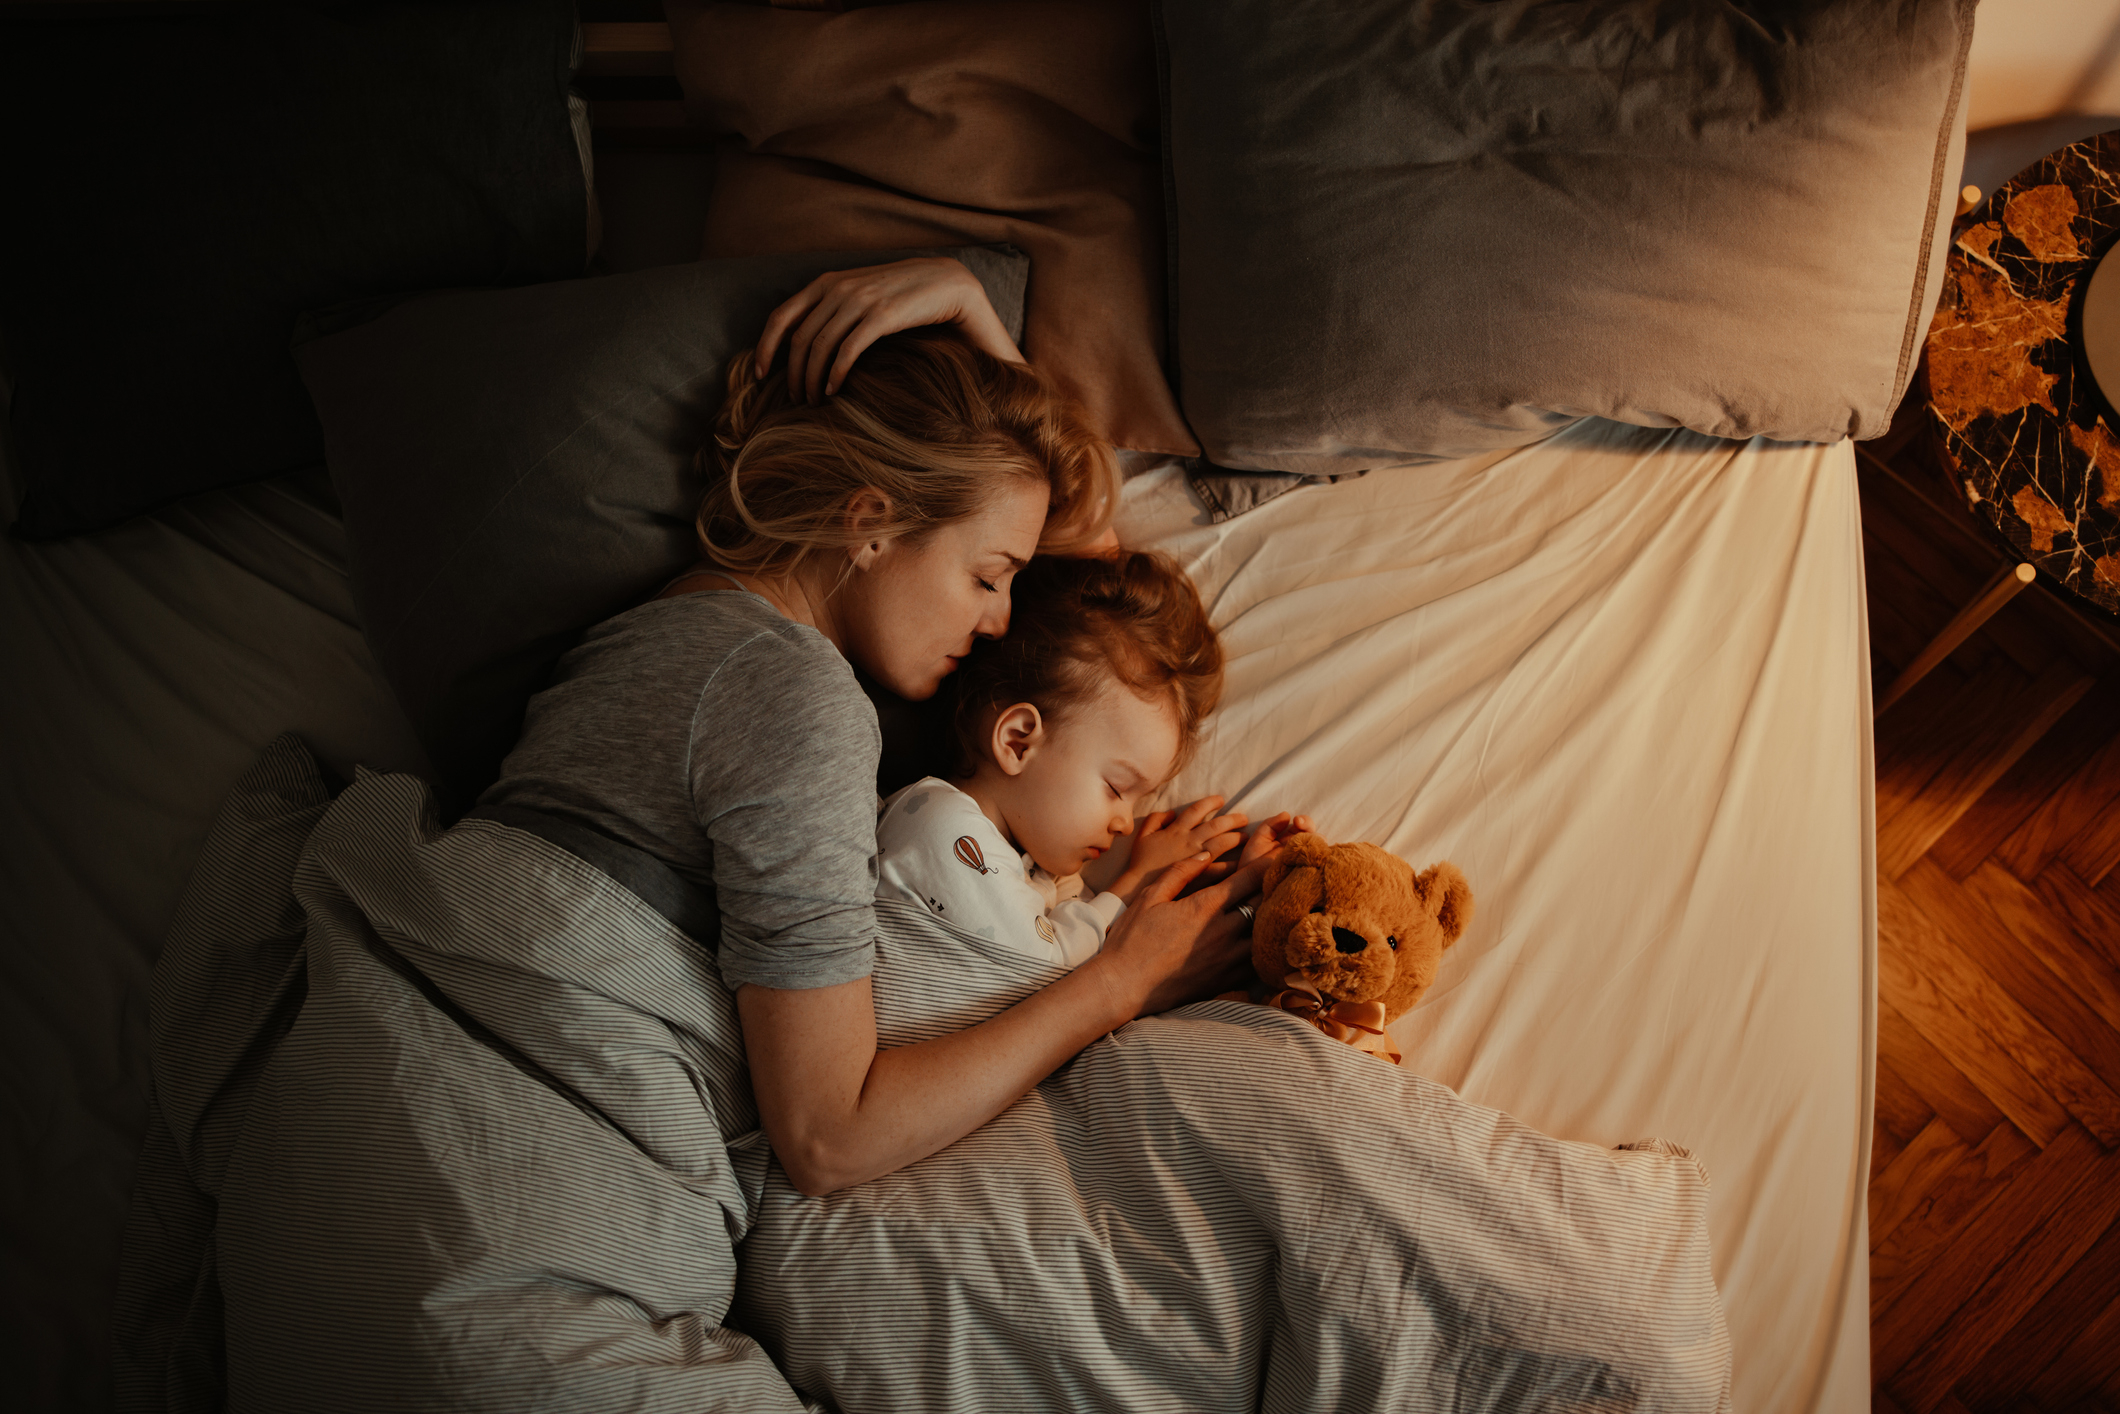 A mother and child cuddling in bed